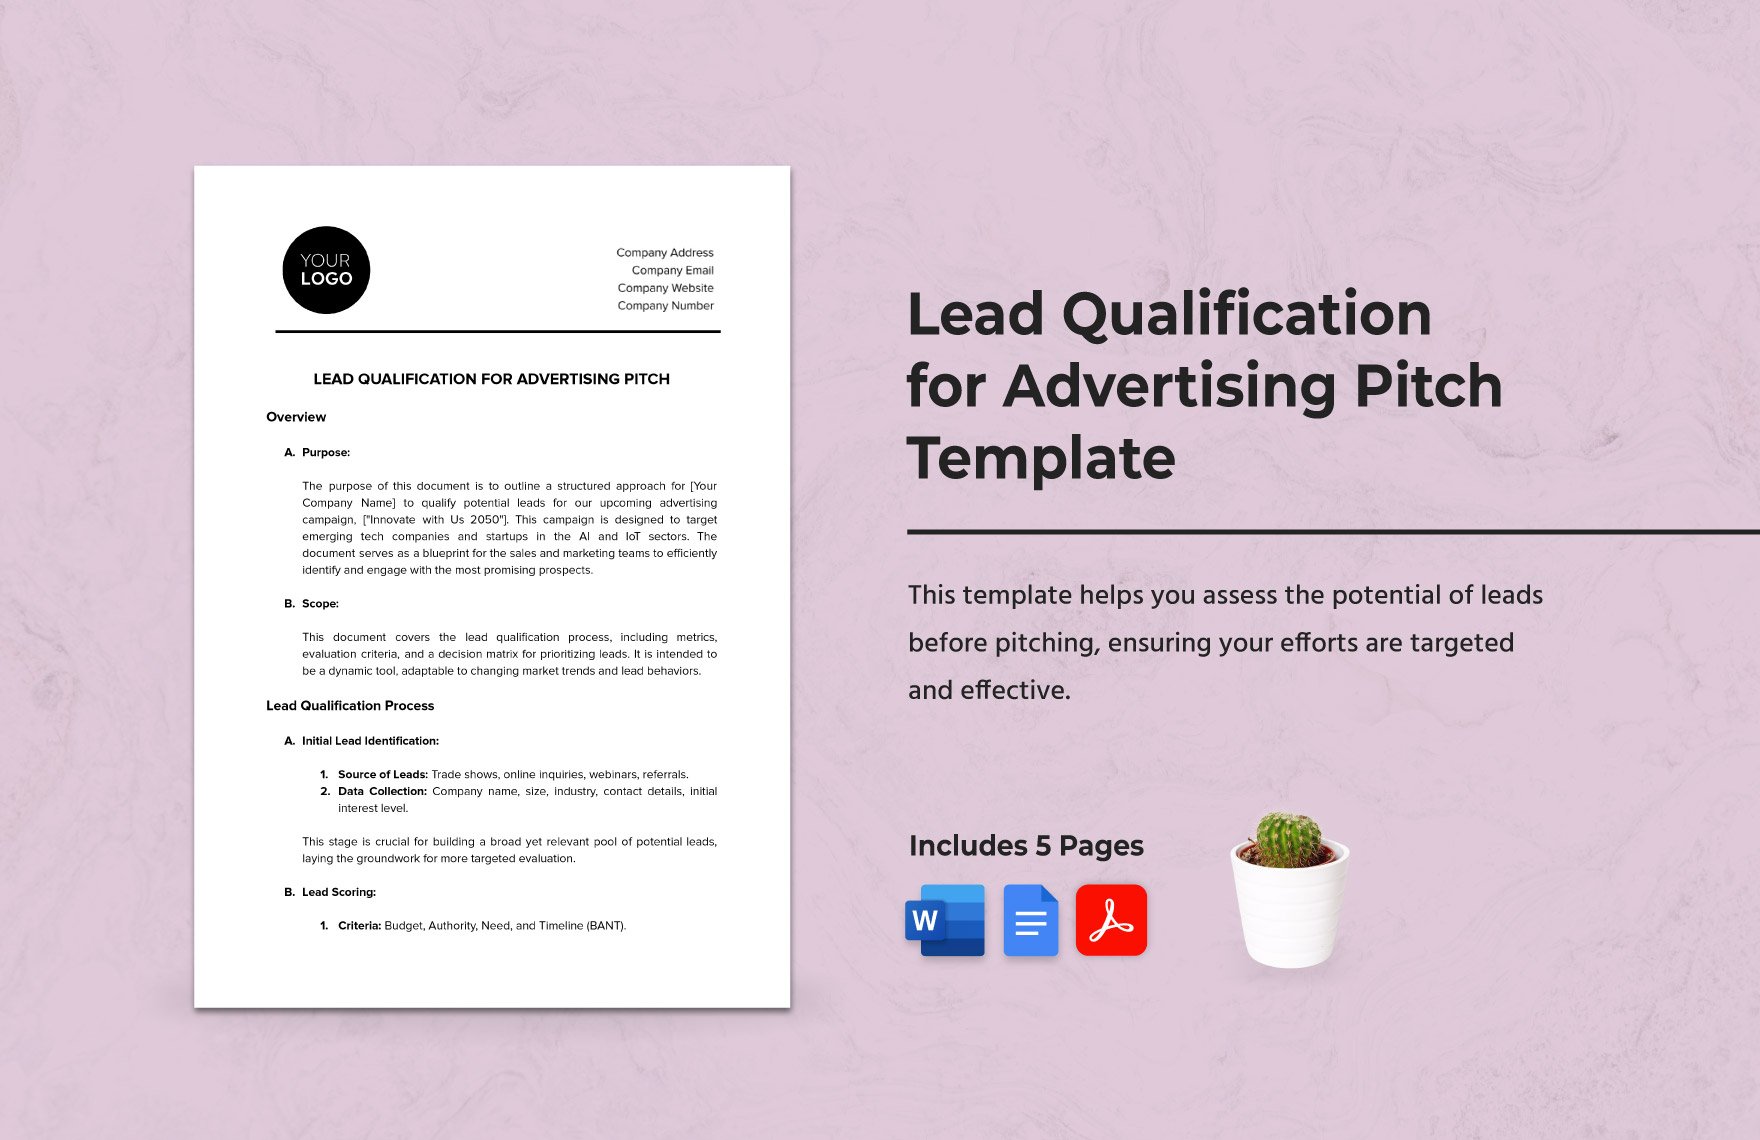 Lead Qualification for Advertising Pitch Template in Word, Google Docs, PDF